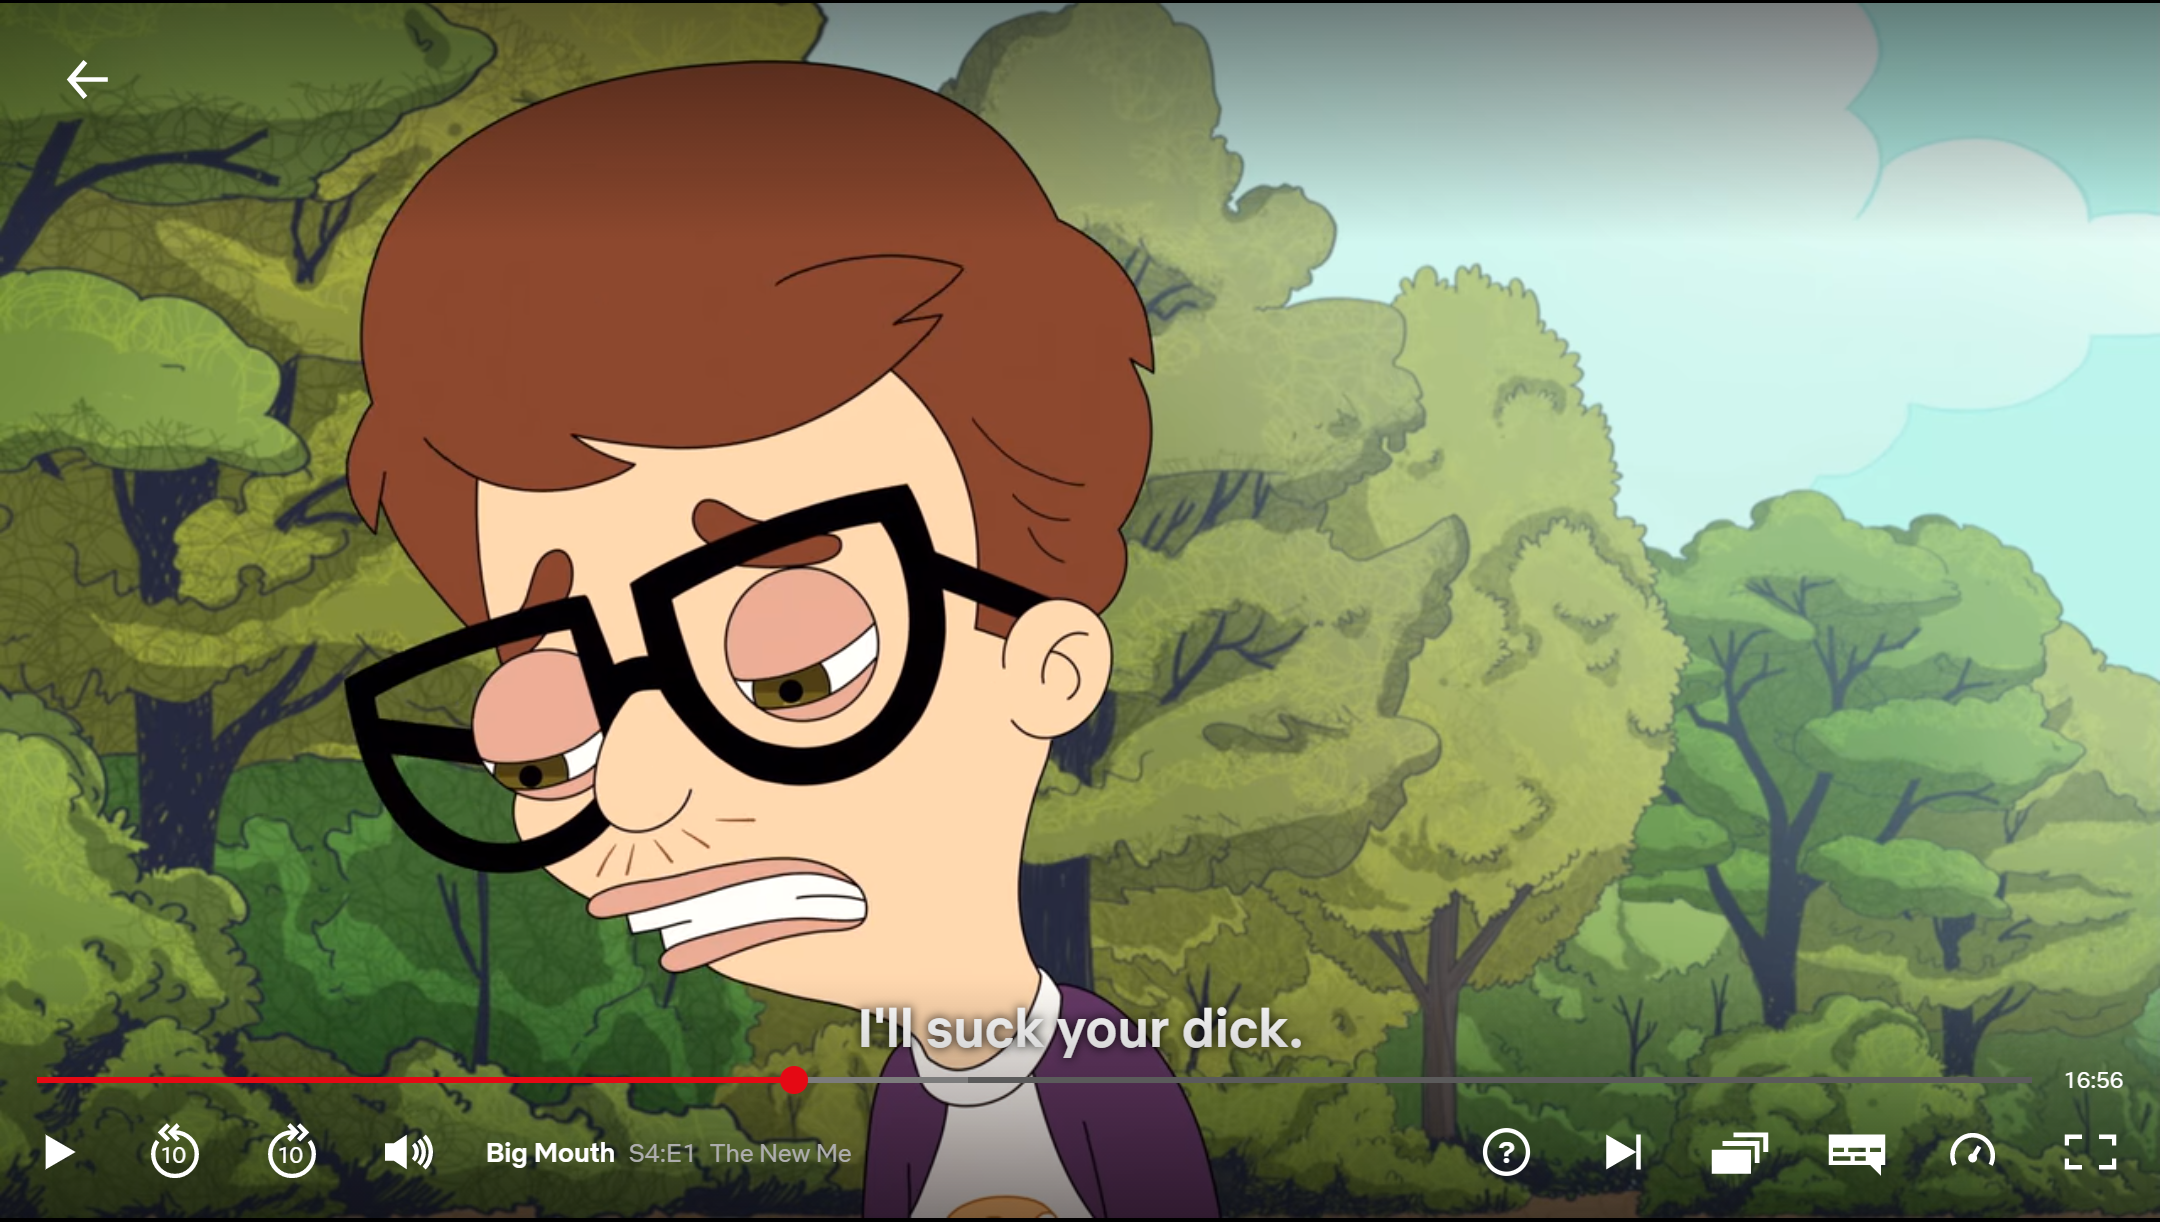 Wet Pussy Cartoon Quotes - Big Mouth Content | Parents Television Council